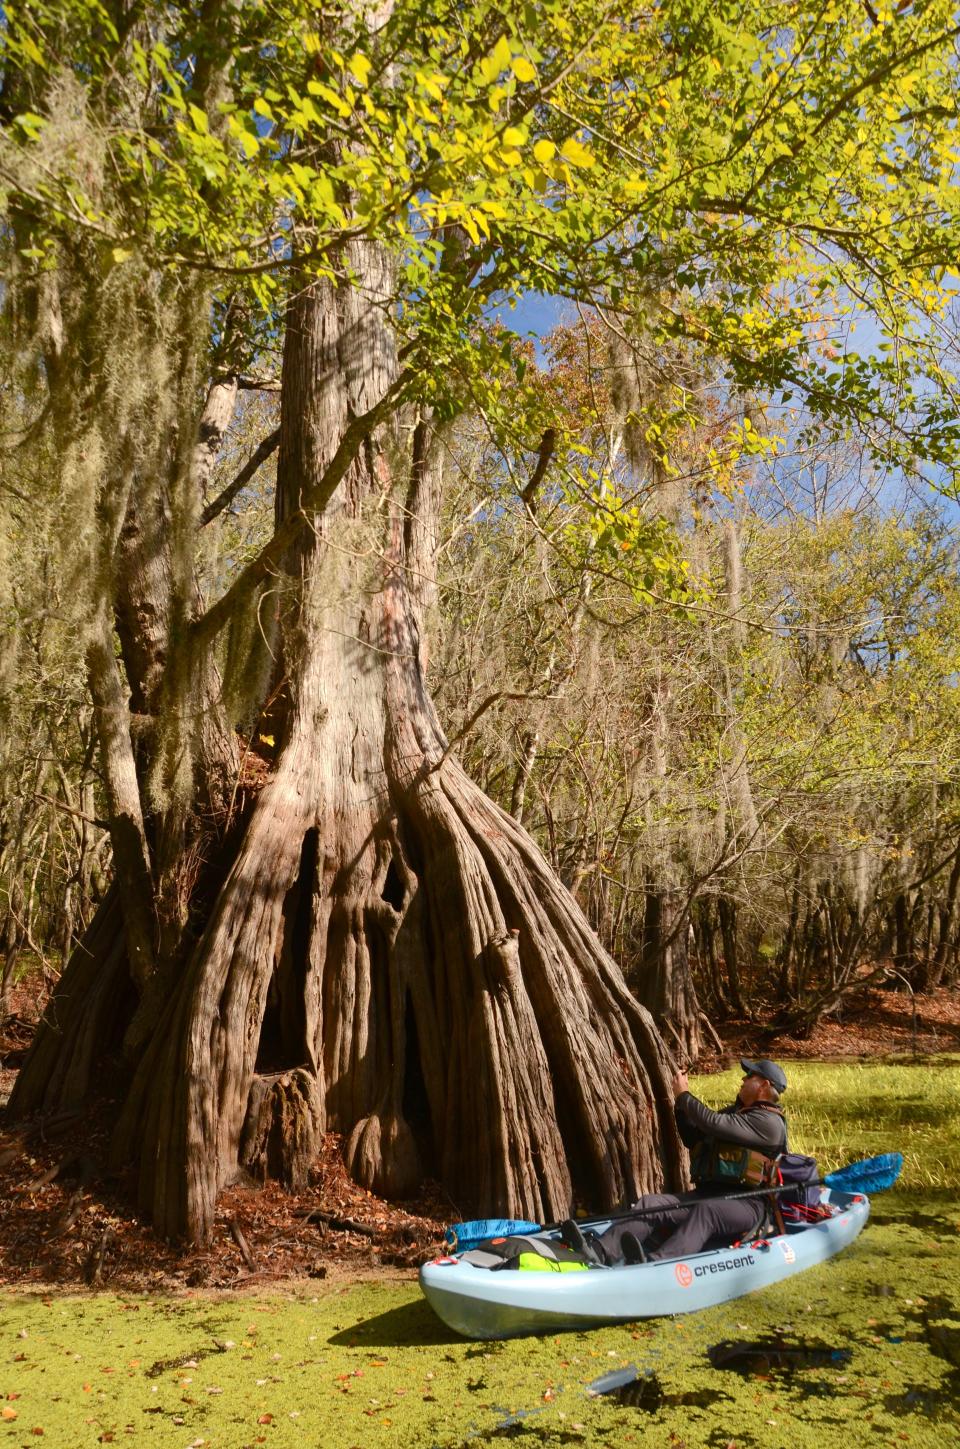 FILE: A paddler inspects a cypress tree on Ebenezer Creek in Effingham County. While the Clean Water Act affords protection for larger bodies of water like Ebenezer Creek, smaller streams and wetlands in the area have had protections questioned by recent federal rules and were dealt a blow in the Sackett v. EPA decision.